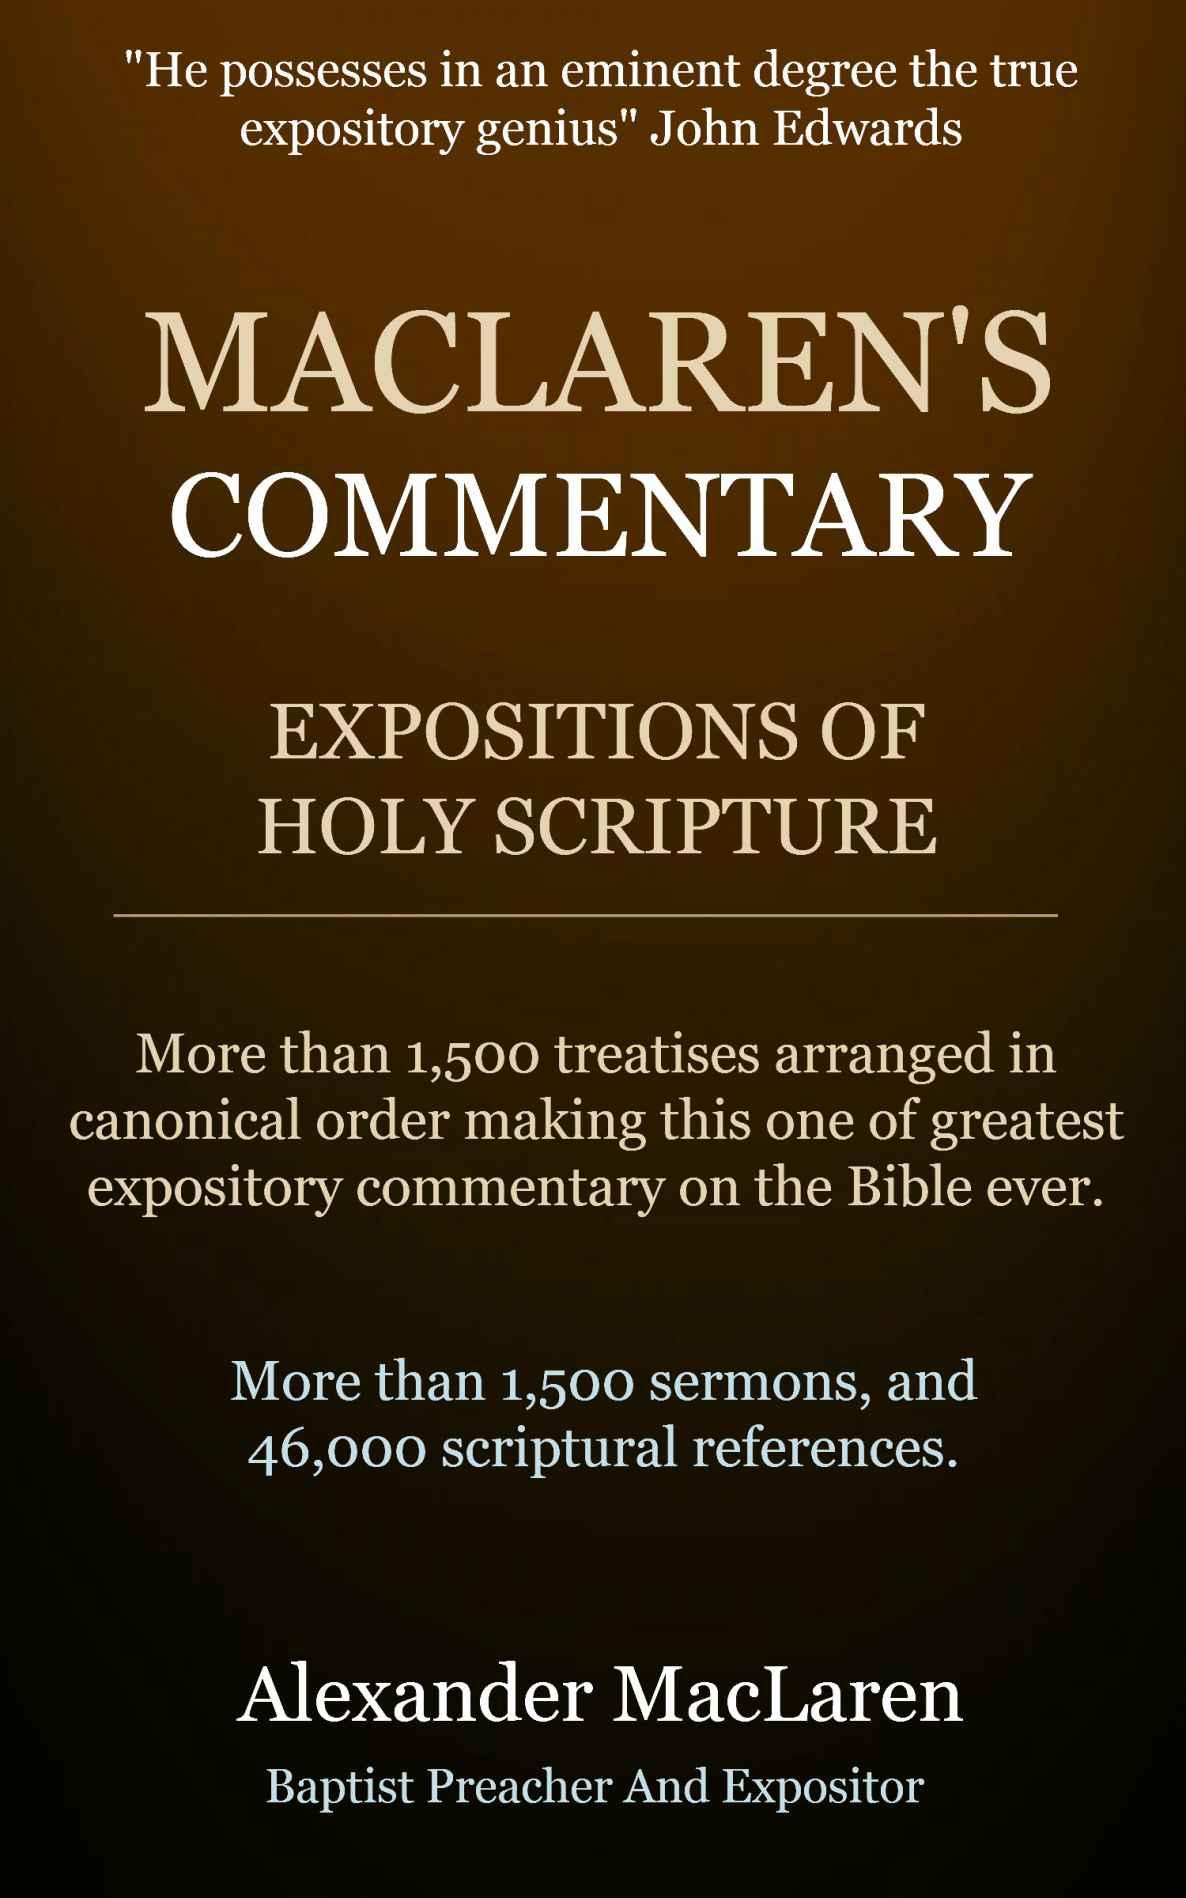 MacLaren's Commentary (Expositions Of Holy Scripture) 32 Books In 1 Volume.: An Expositor's Bible Commentary